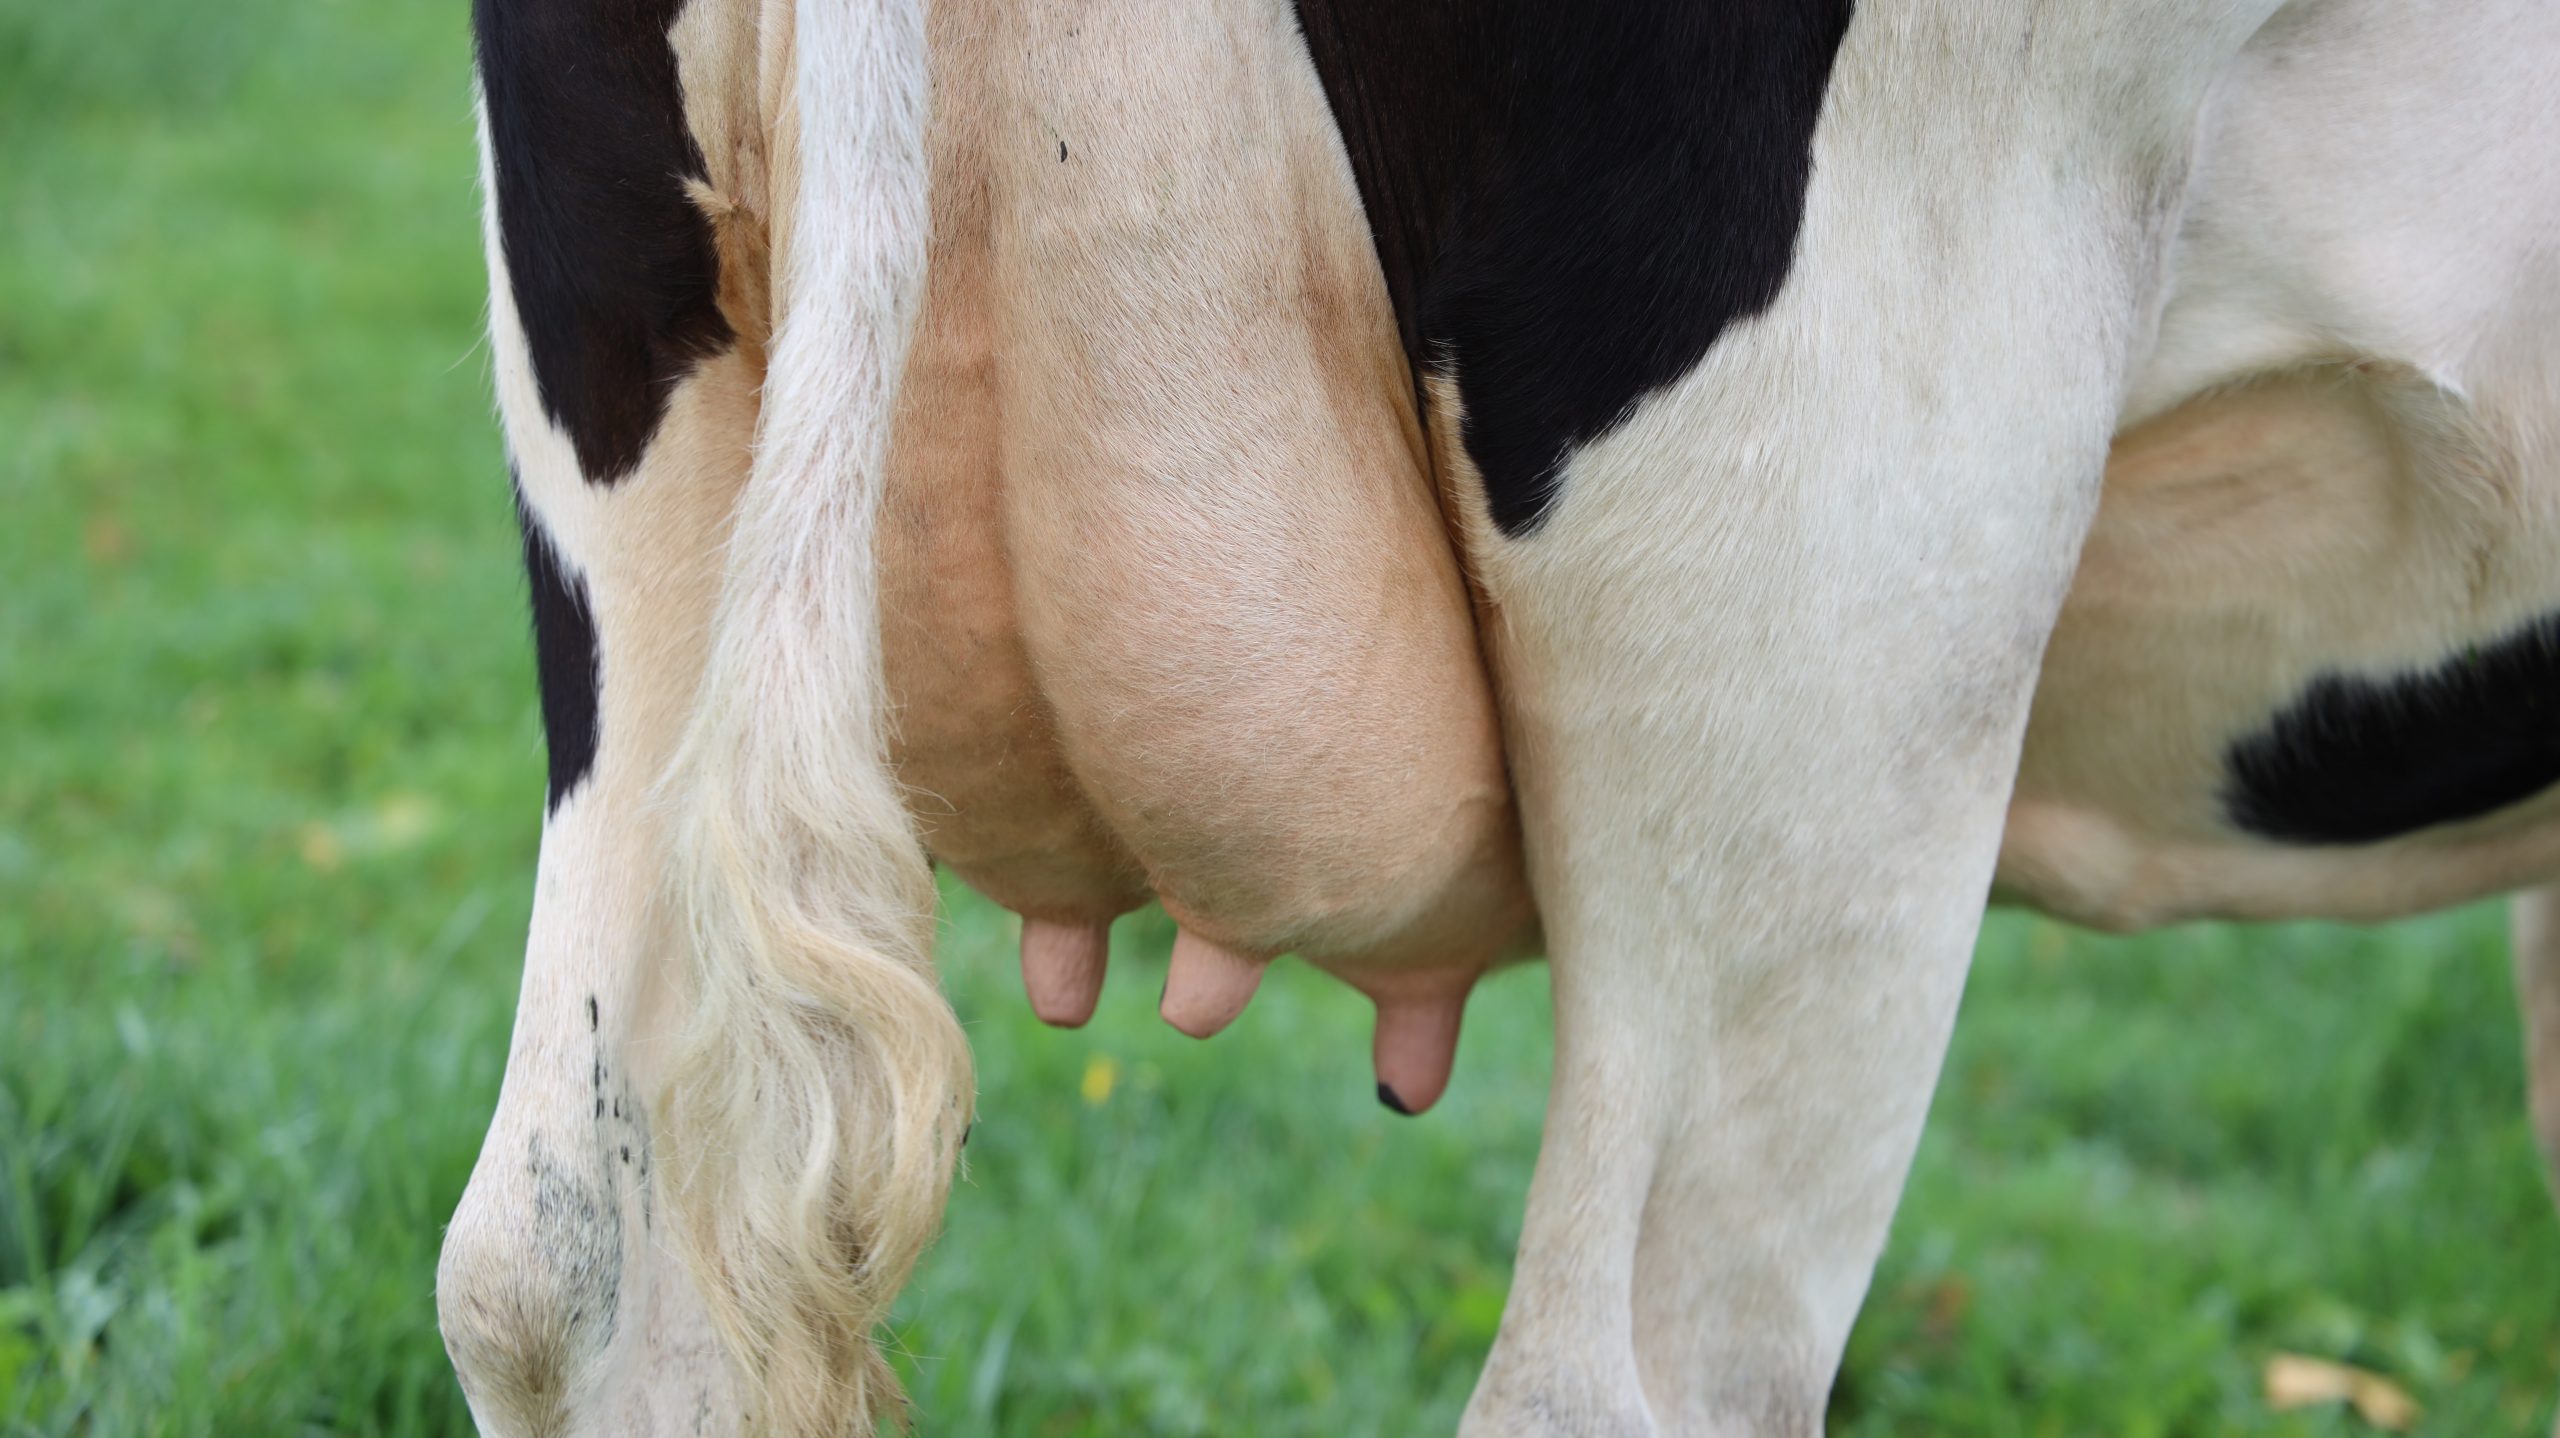 Dairy farming: lactation can be extended